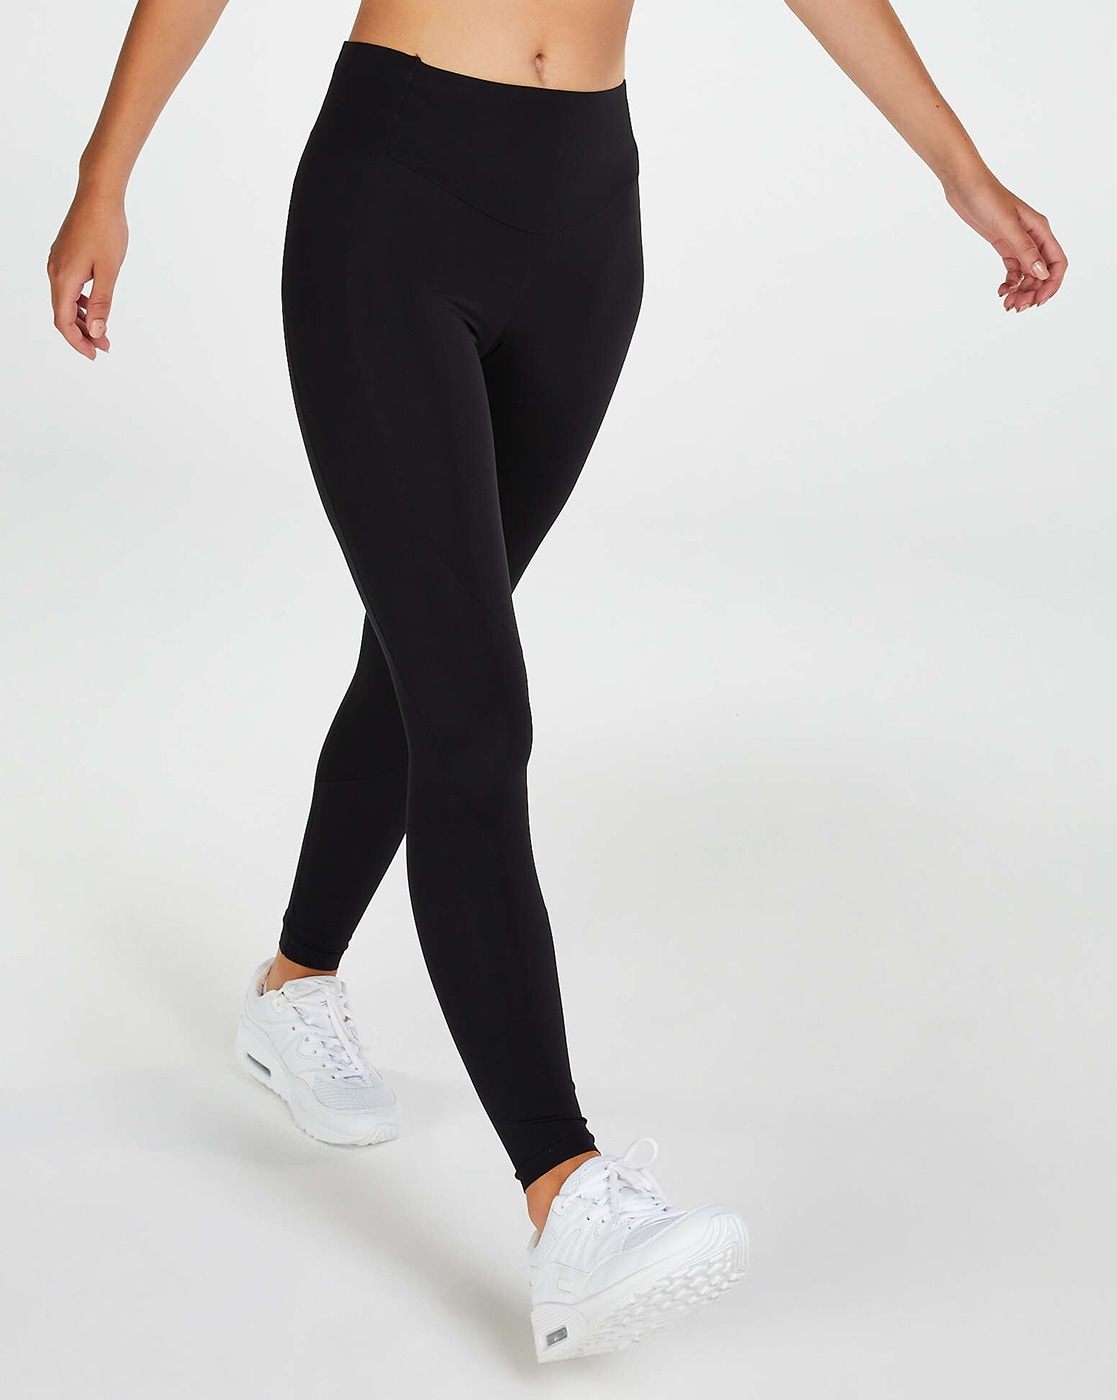 Buy Proskins Women's High Waisted Leggings Online at Low Prices in India 